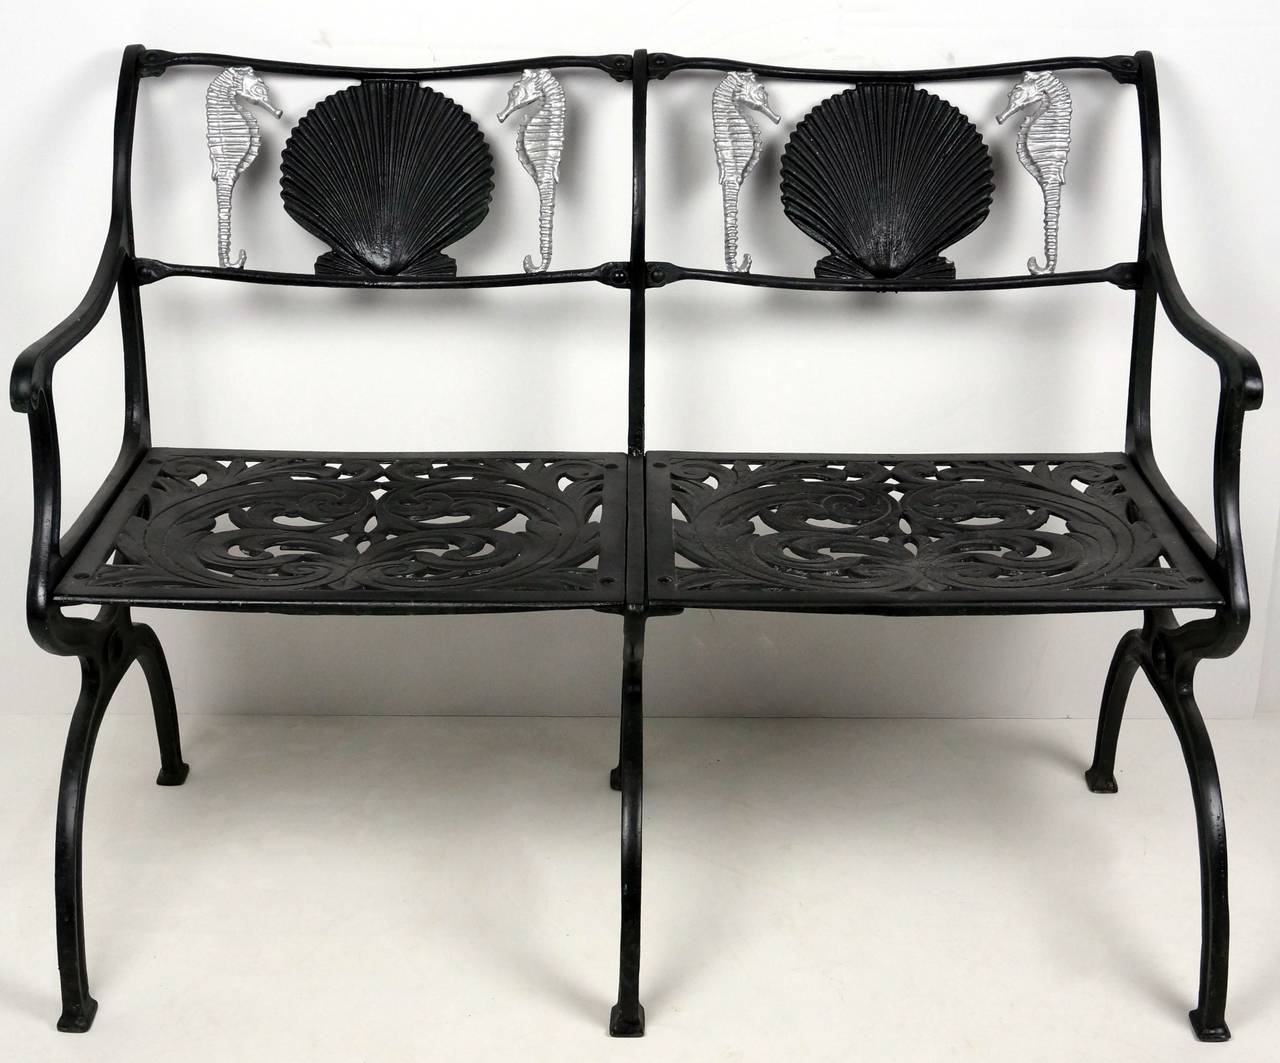 This garden settee with its seahorse and shell motif was designed and created by Molla in the 1950s. It is fabricated in cast-aluminium and is painted in a flat black and metallic silver.

There are also a pair of arm chairs available in the same